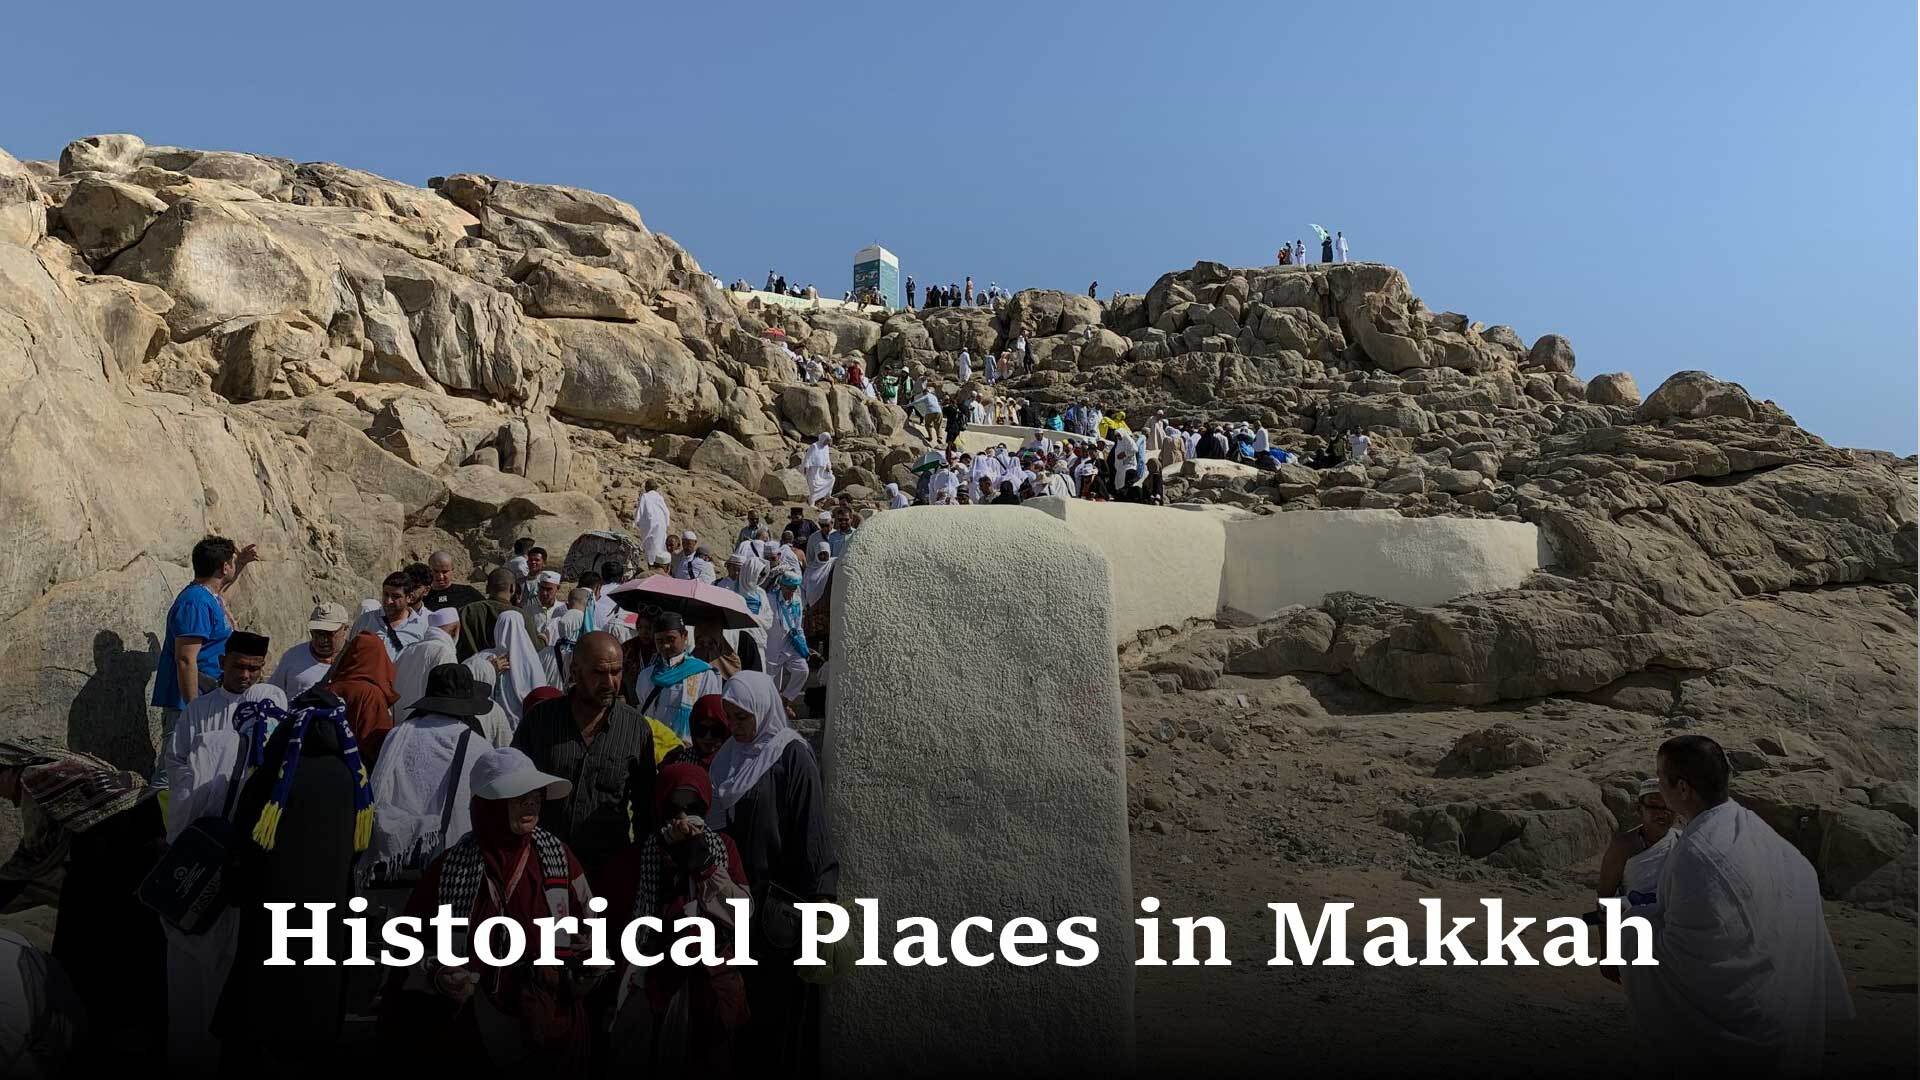 Historical Islamic Places in Makkah